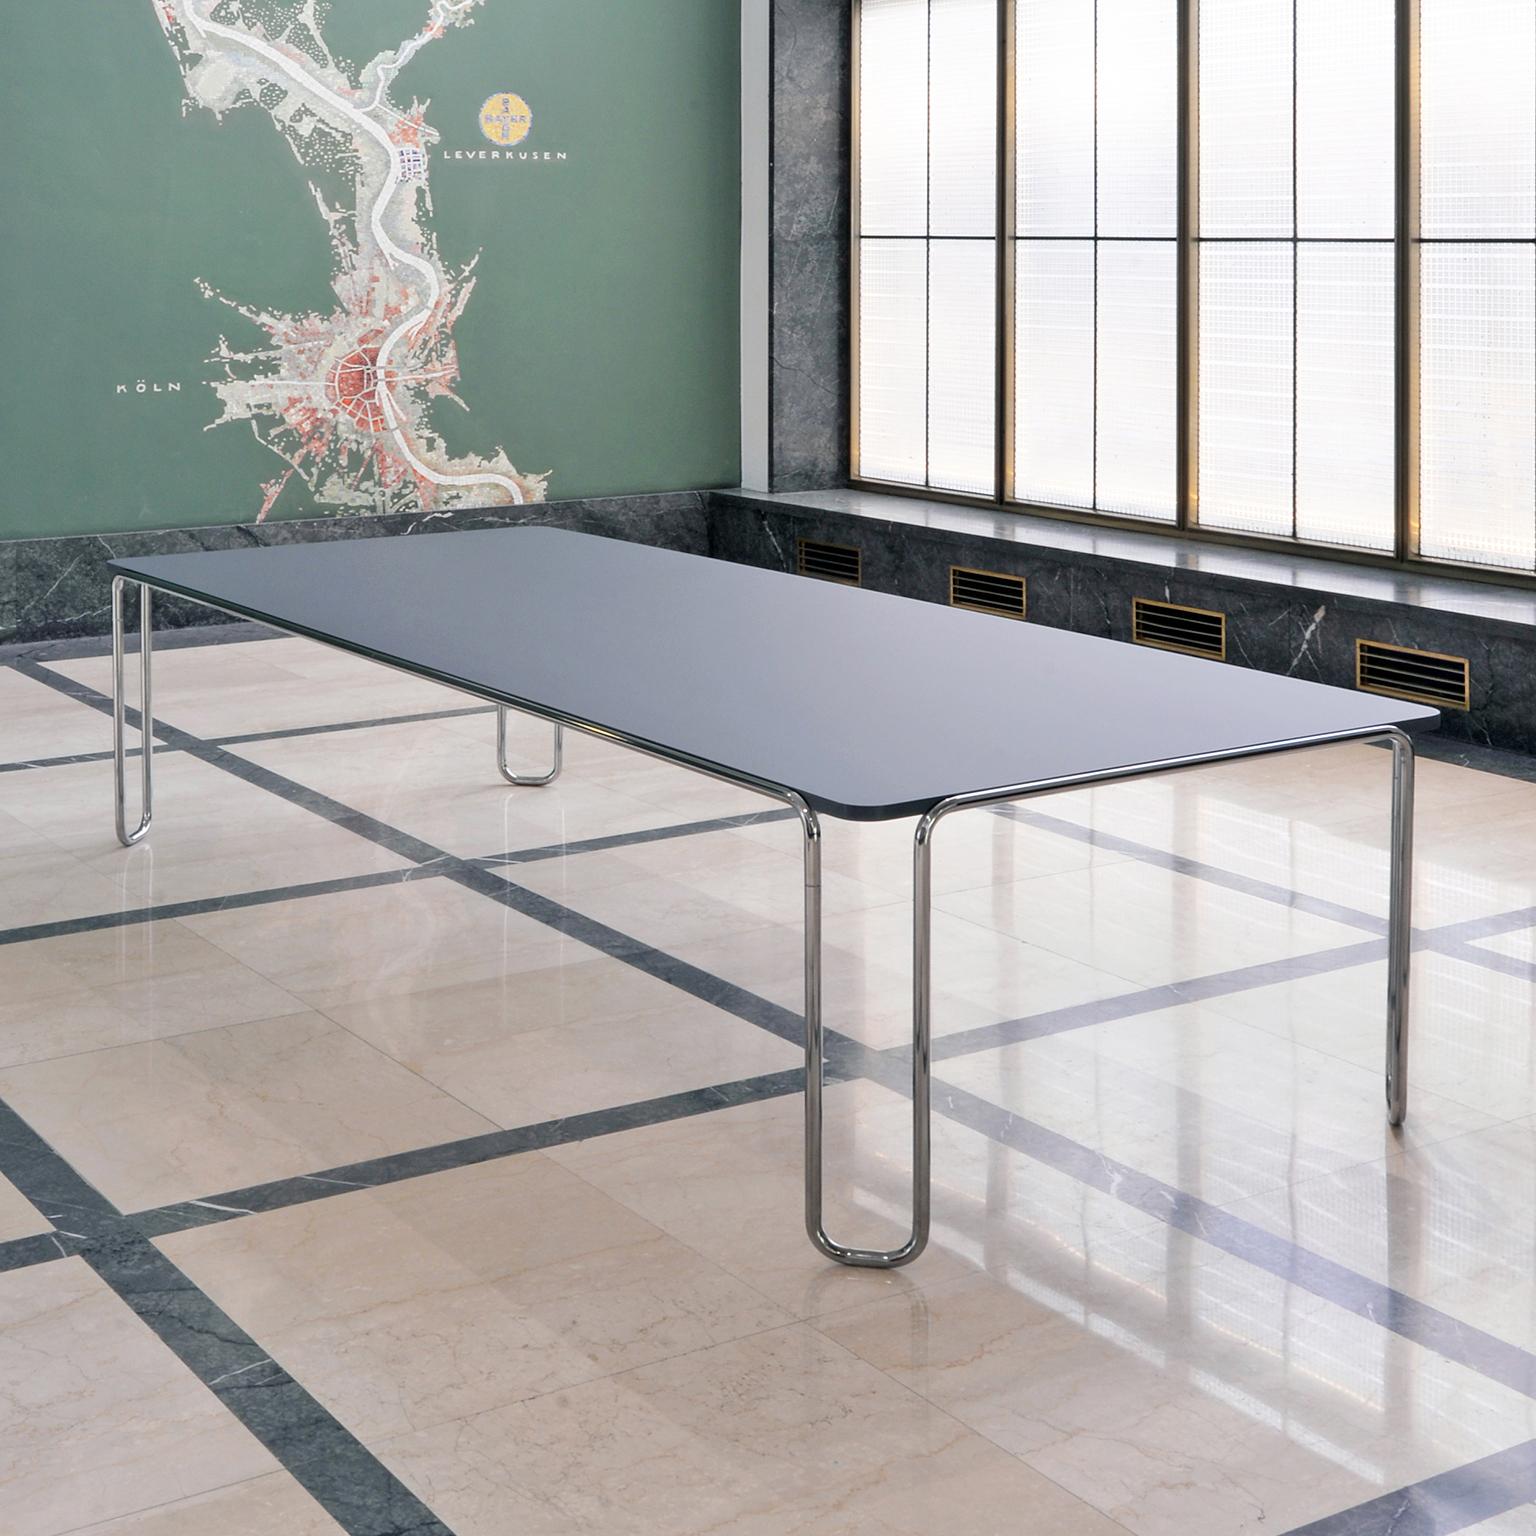 Large Modernist Custom-Made Ultra-Thin Tubular-Steel Table by GMD Berlin  For Sale at 1stDibs